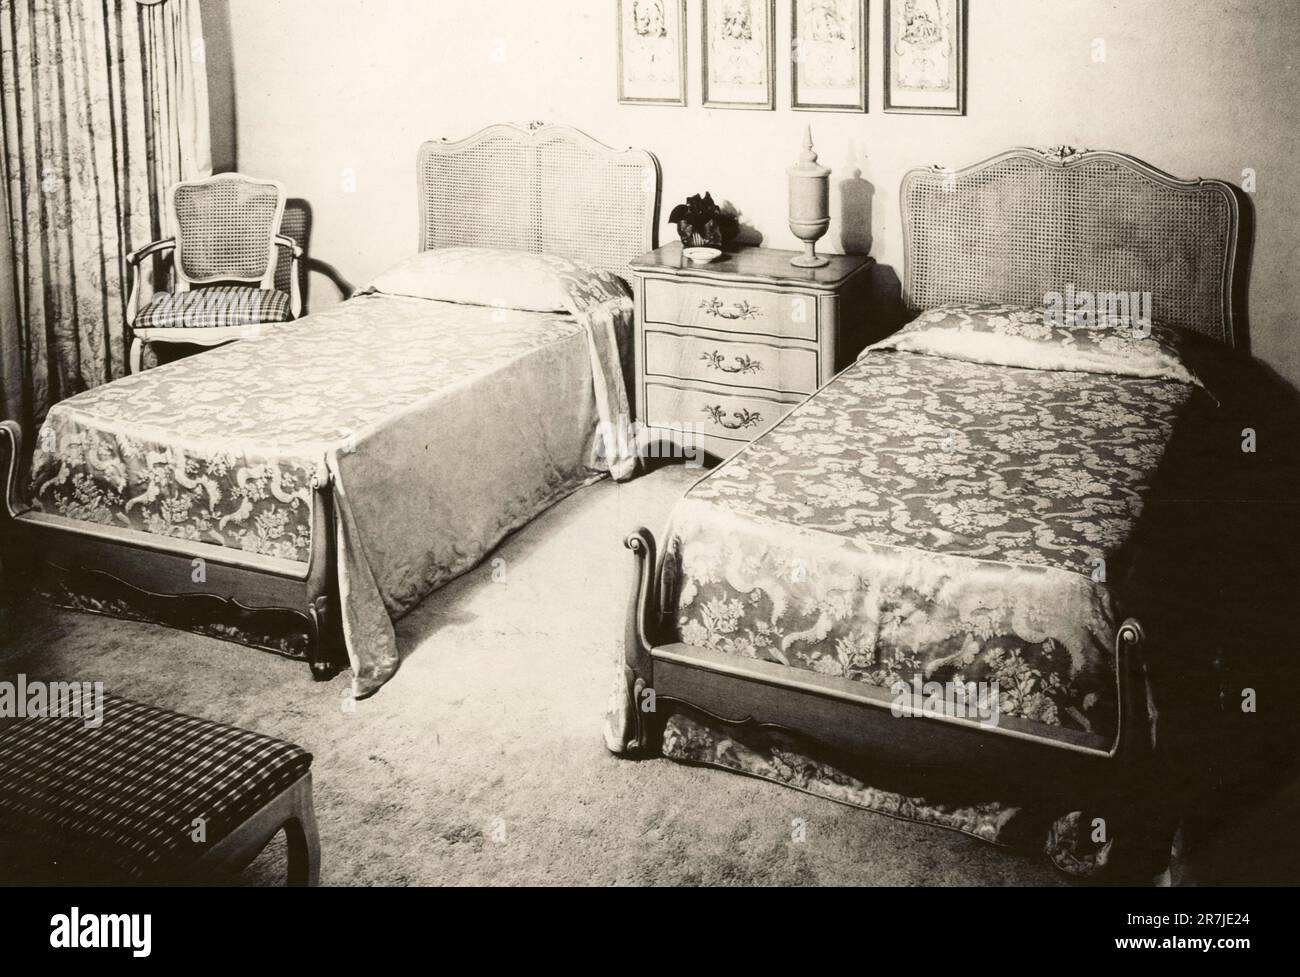 Bedroom composed of single and large beds and bedside table, Italy 1970s Stock Photo